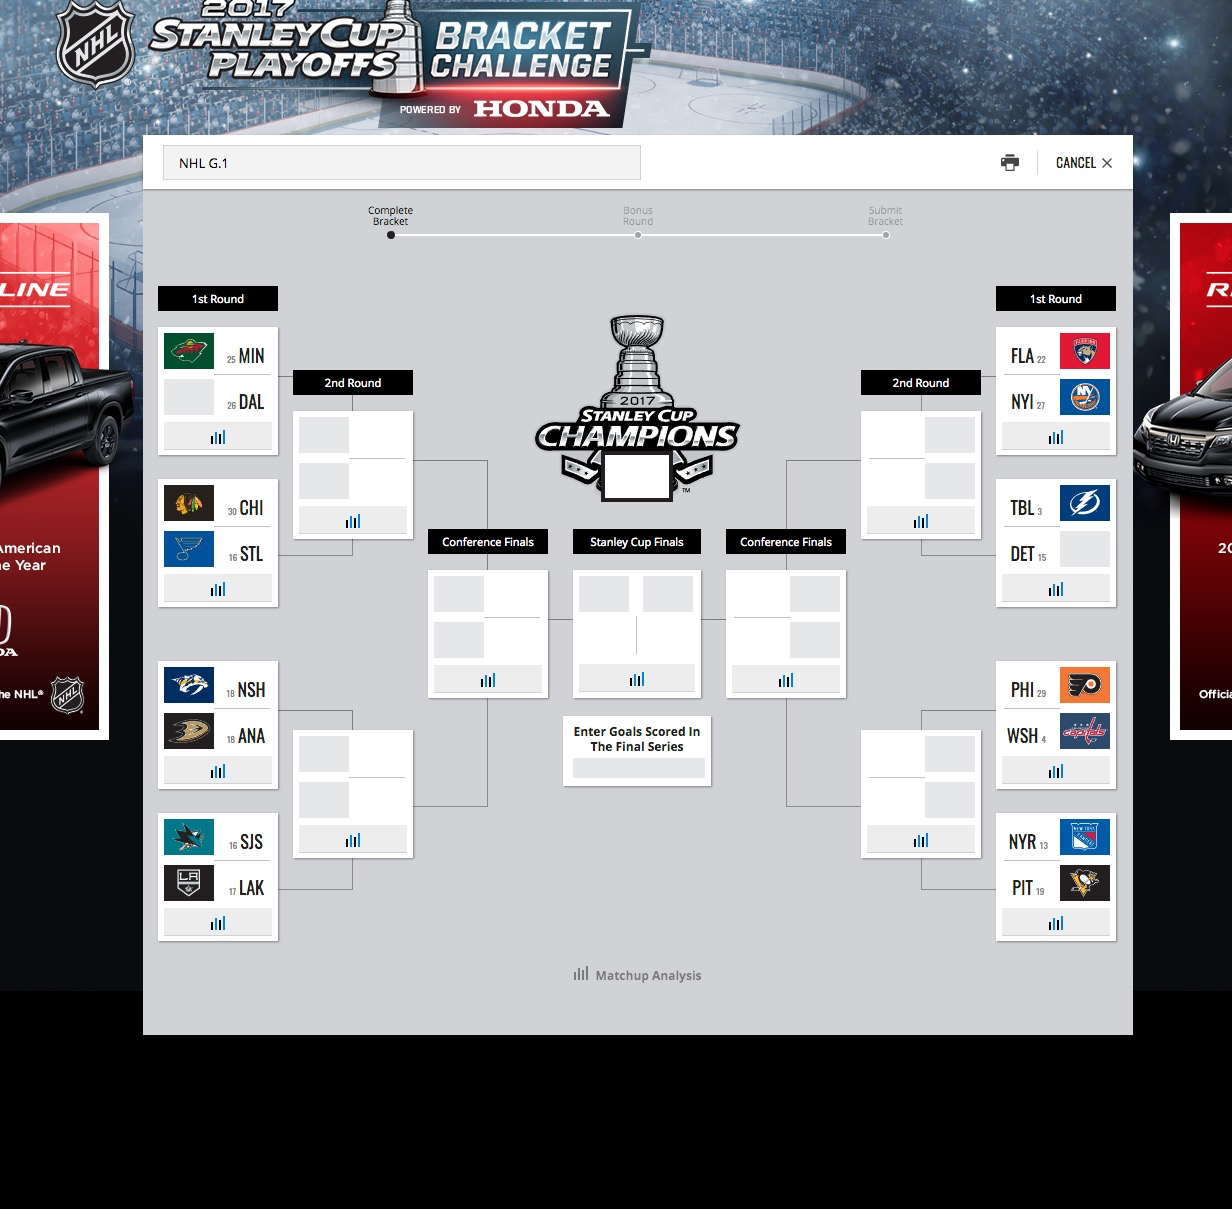 Follow our Stanley Cup playoffs bracket challenge!